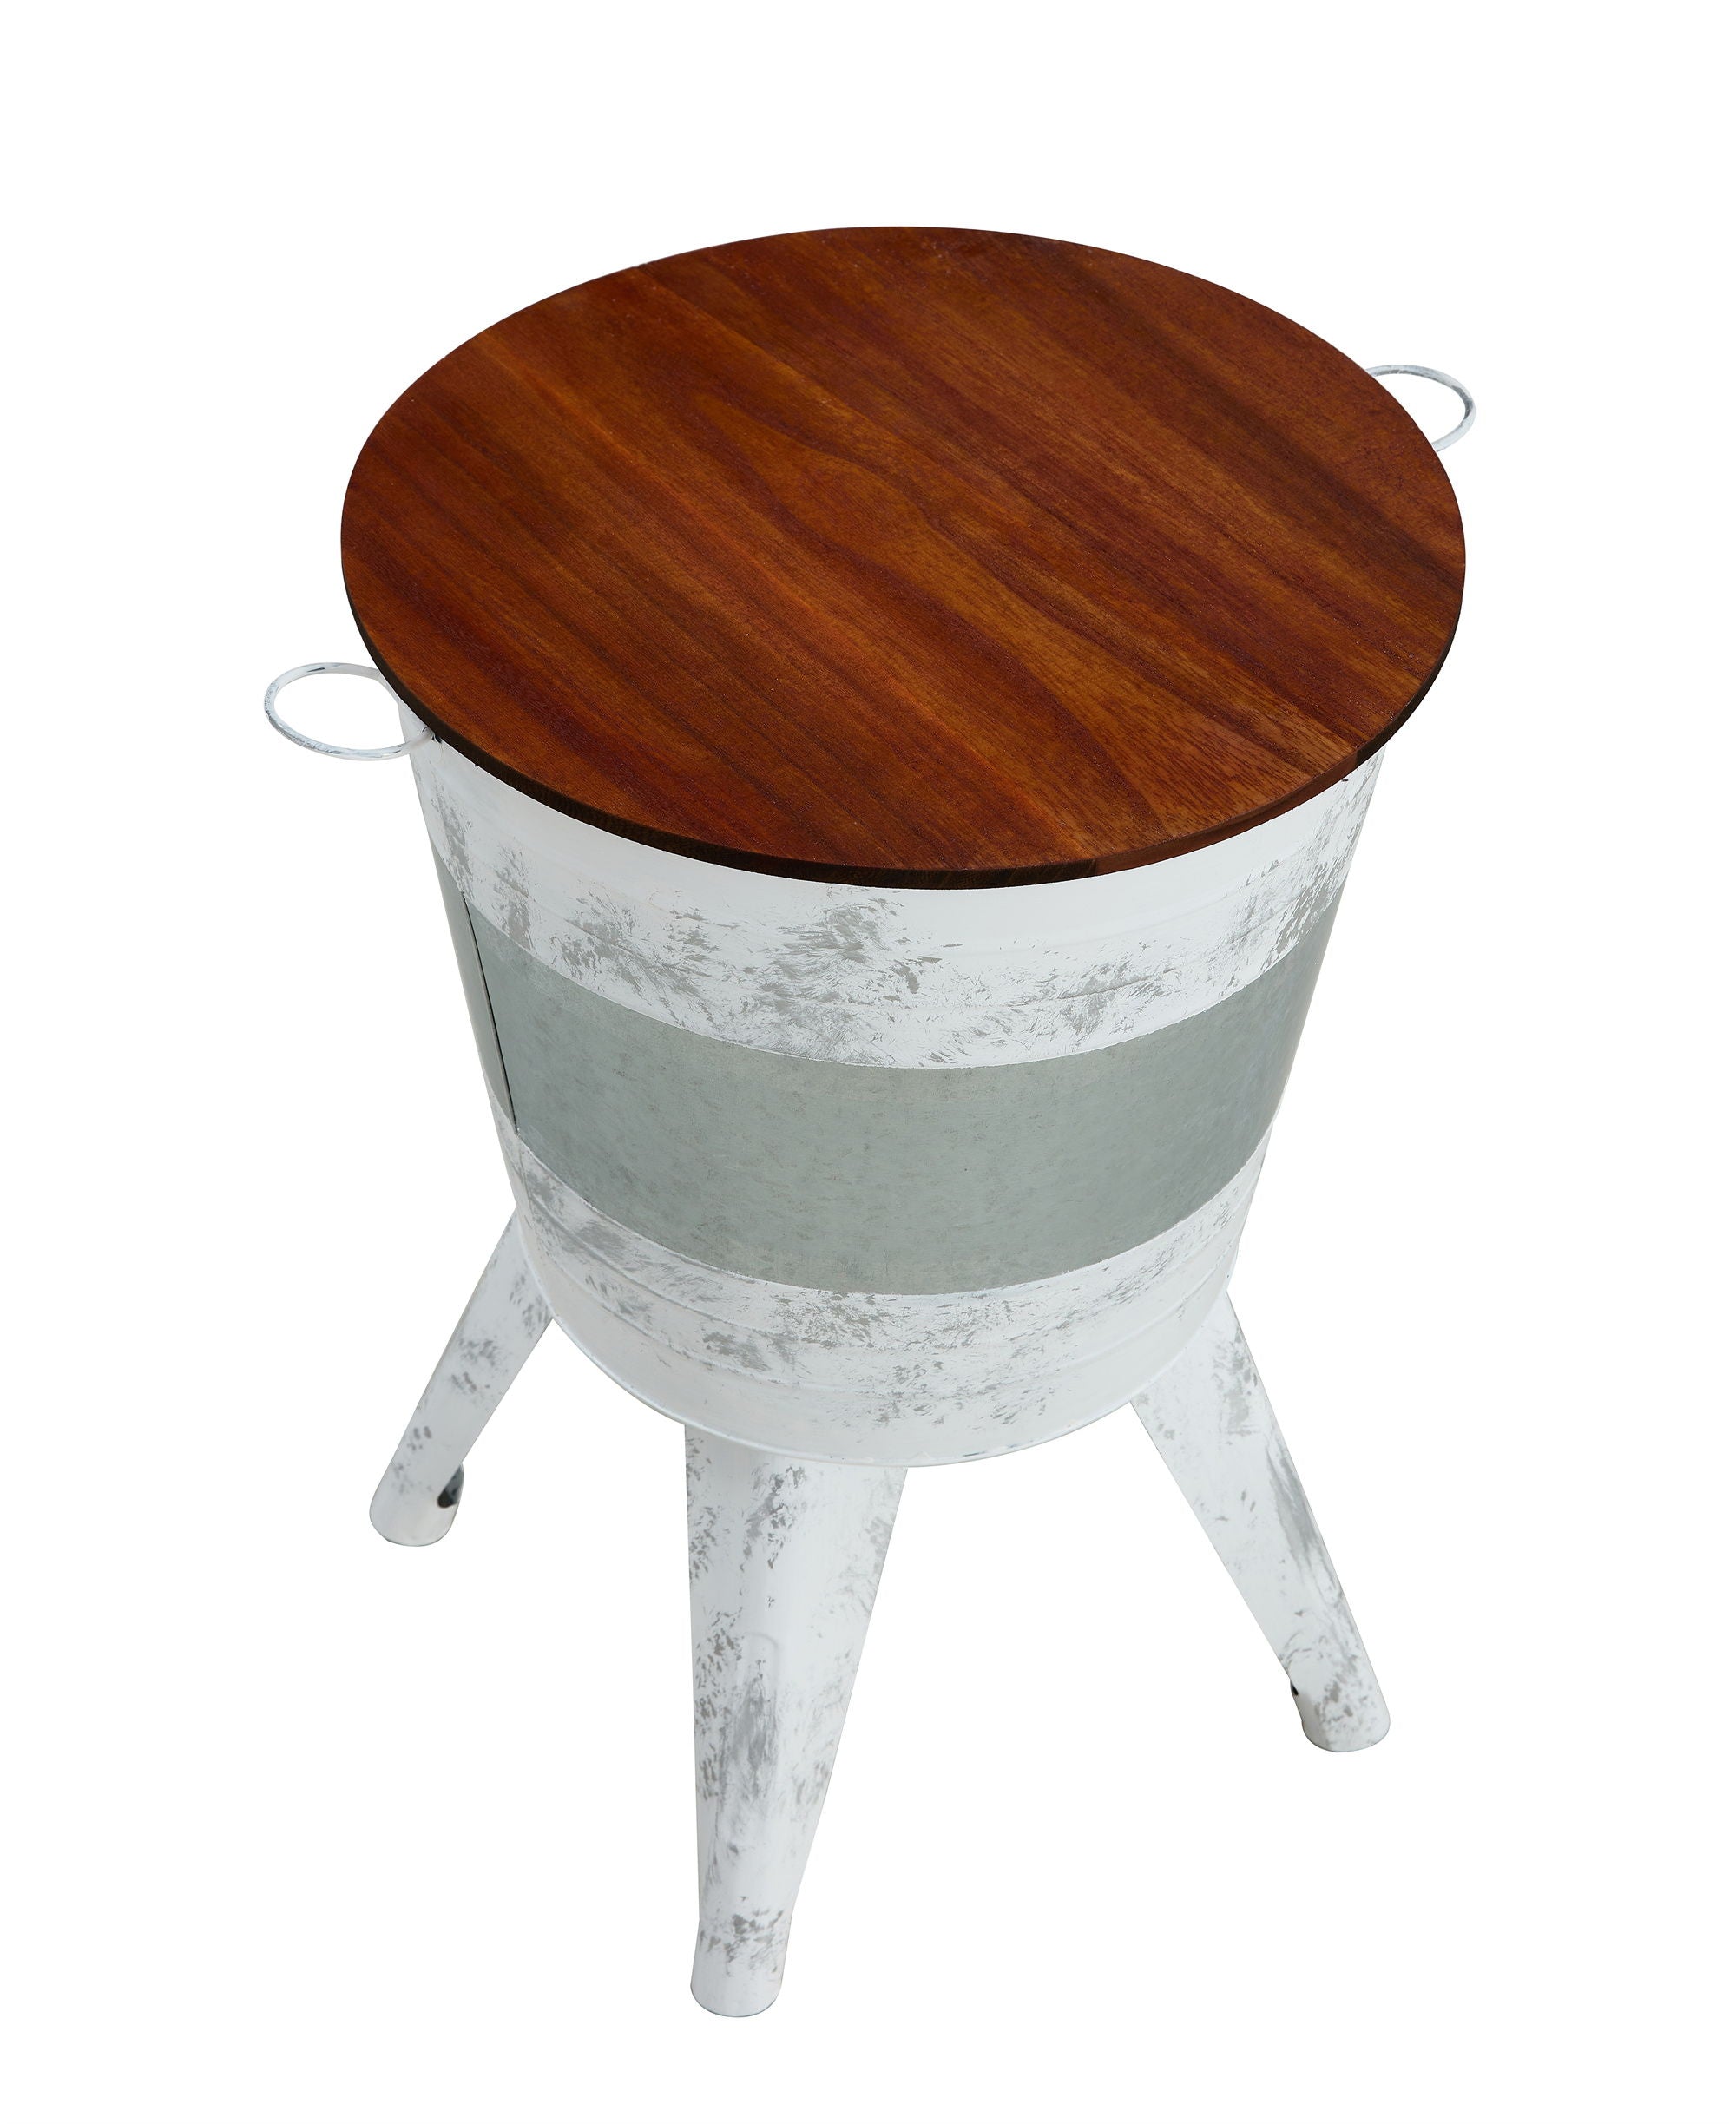 Farmhouse Rustic Distressed Metal Accent Cocktail Table With Wood Top - White & Gray (Set of 2)